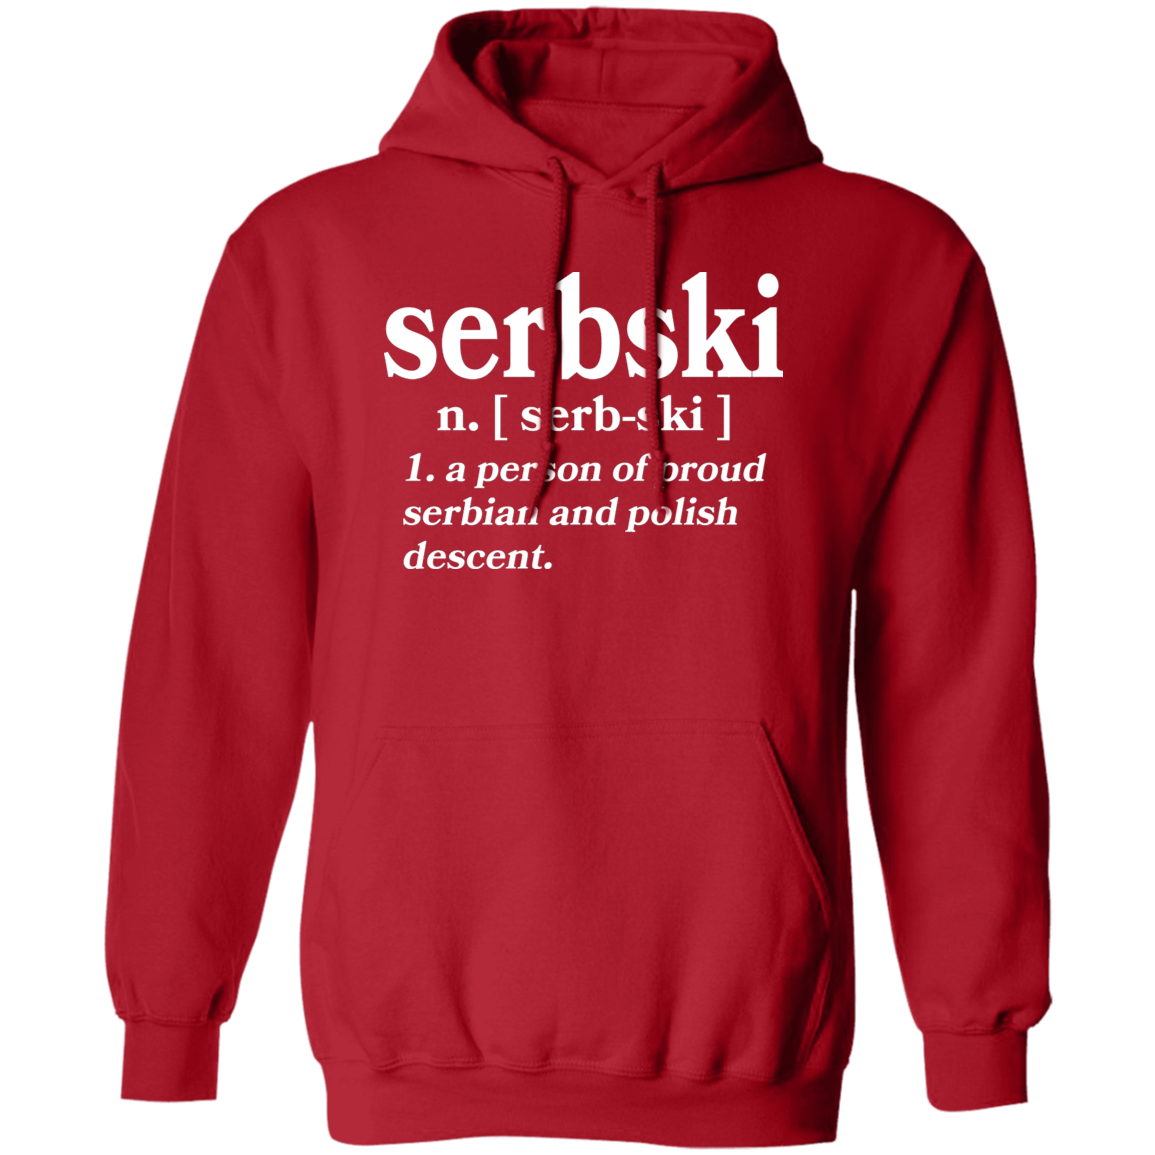 Serbski A Person Of Serbian and Polish Descent Apparel CustomCat G185 Pullover Hoodie Red S